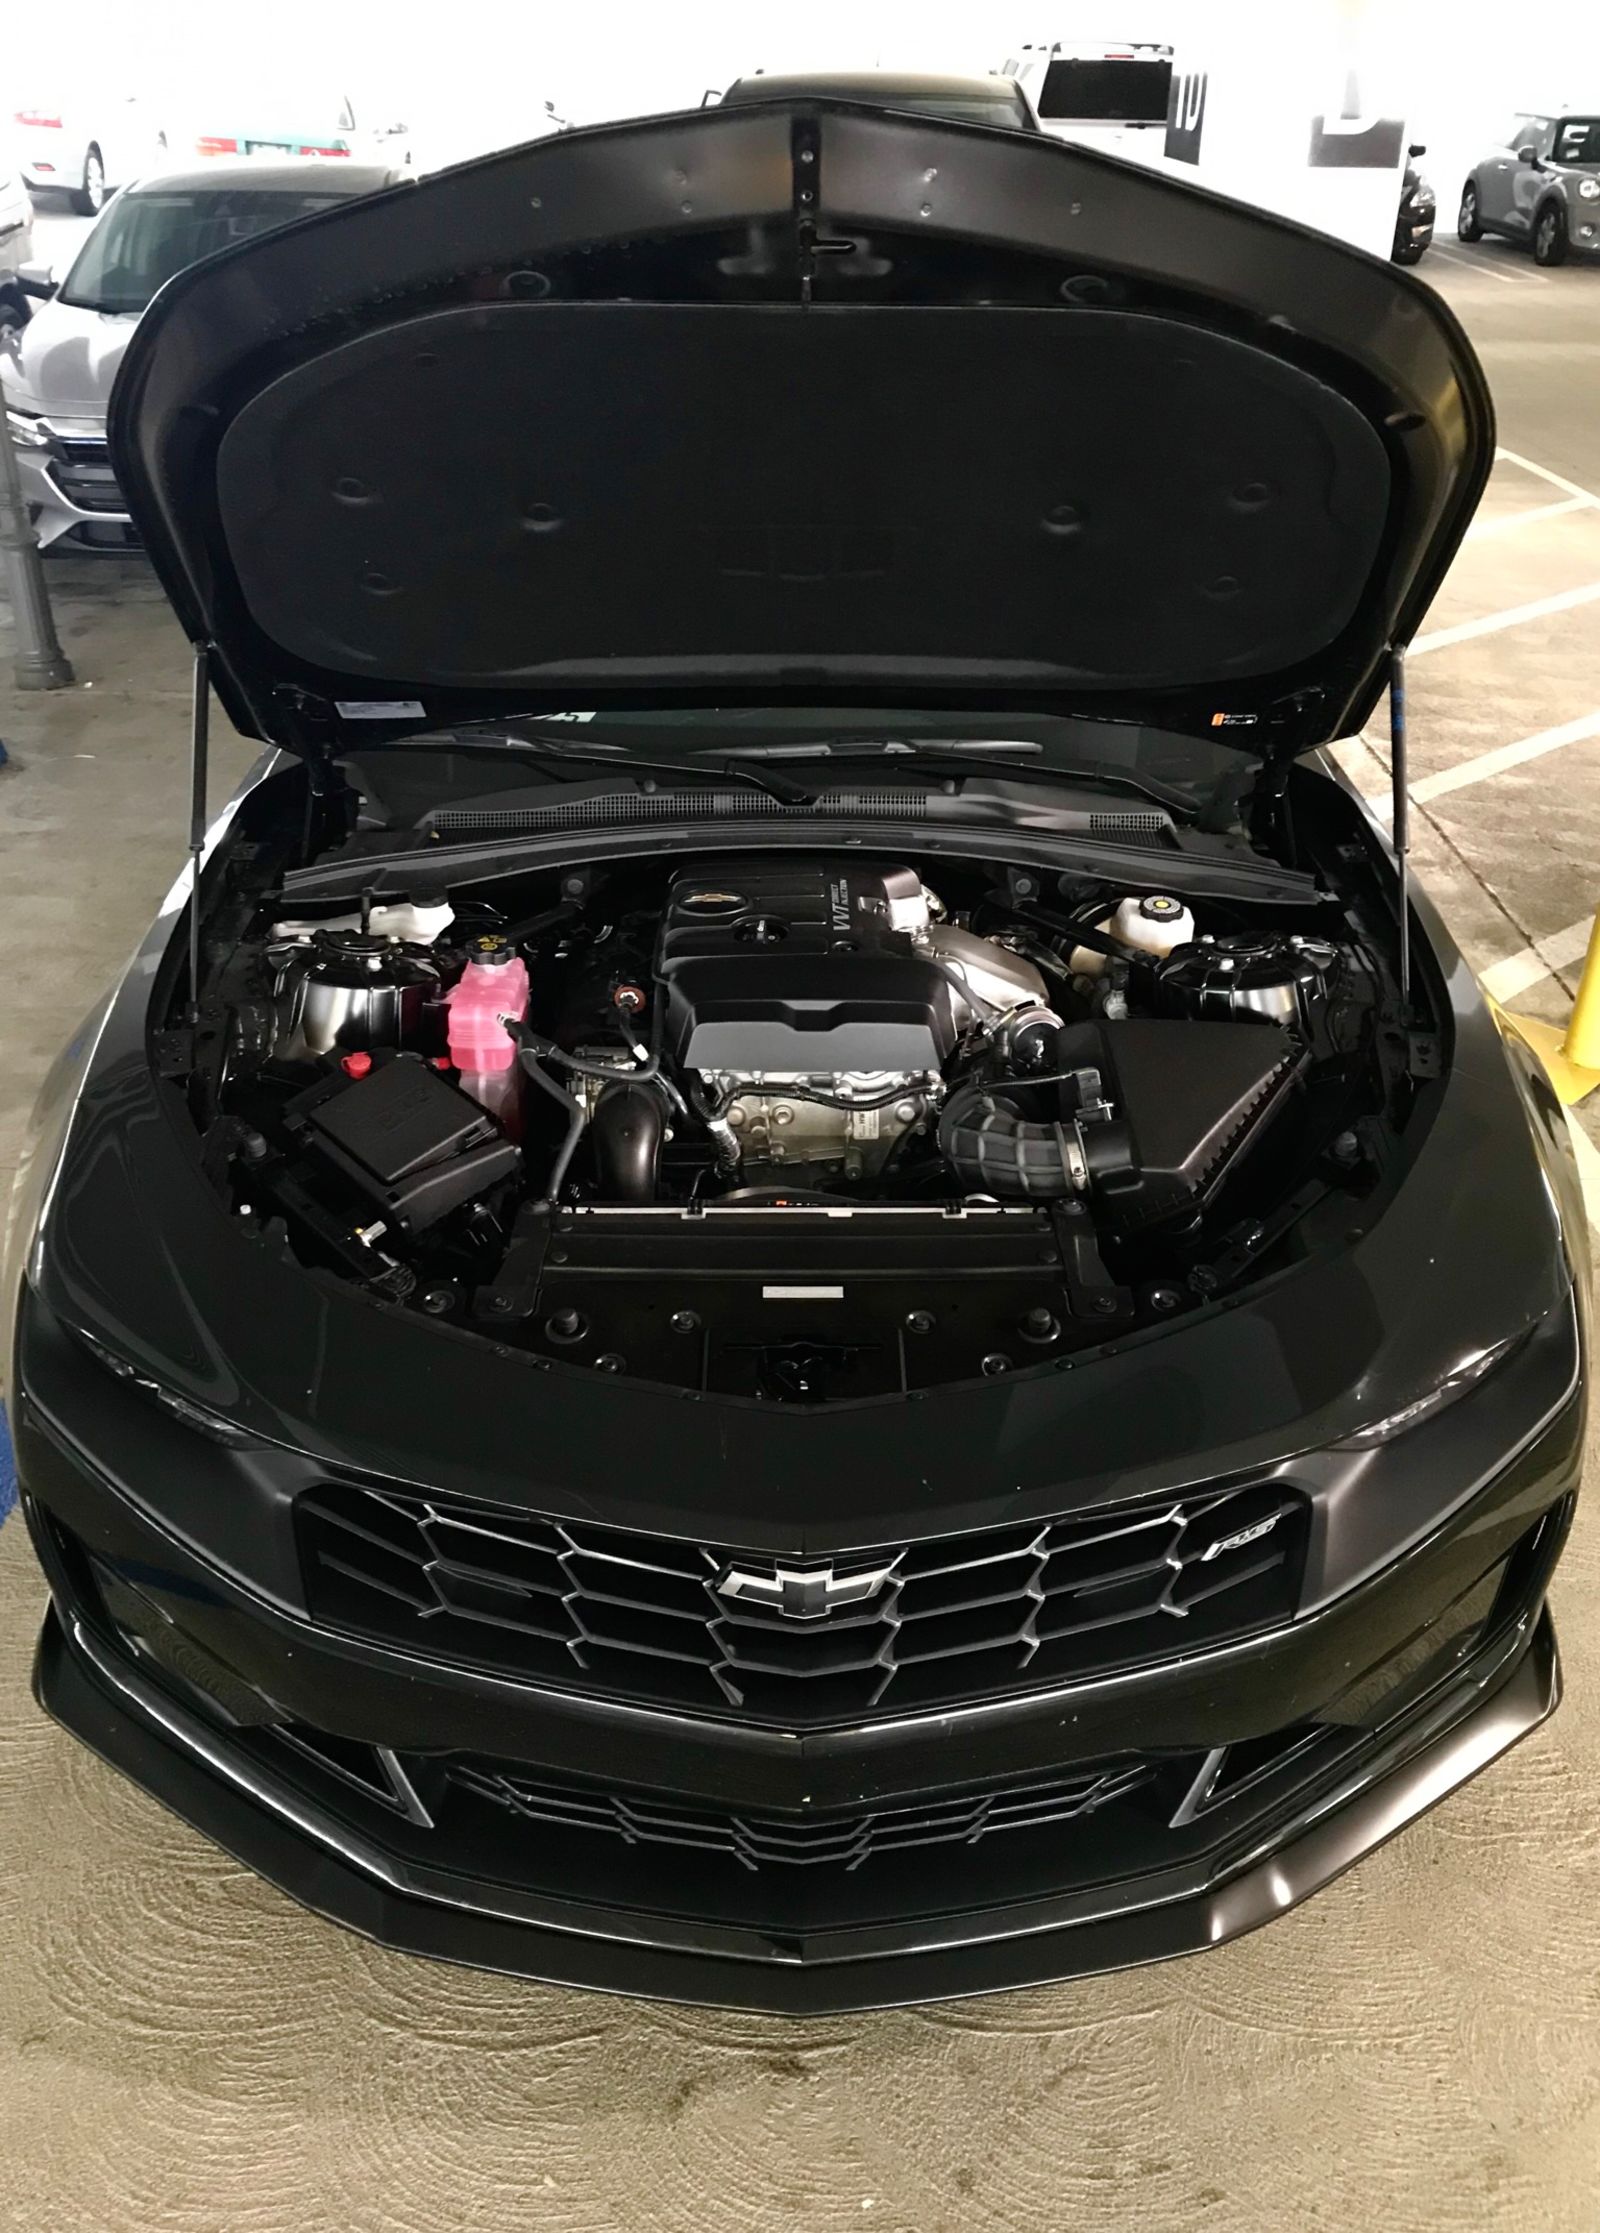 The smallest-displacement engine ever to vroom-vroom under the hood of a Camaro, the 2.0-liter turbo LTG.